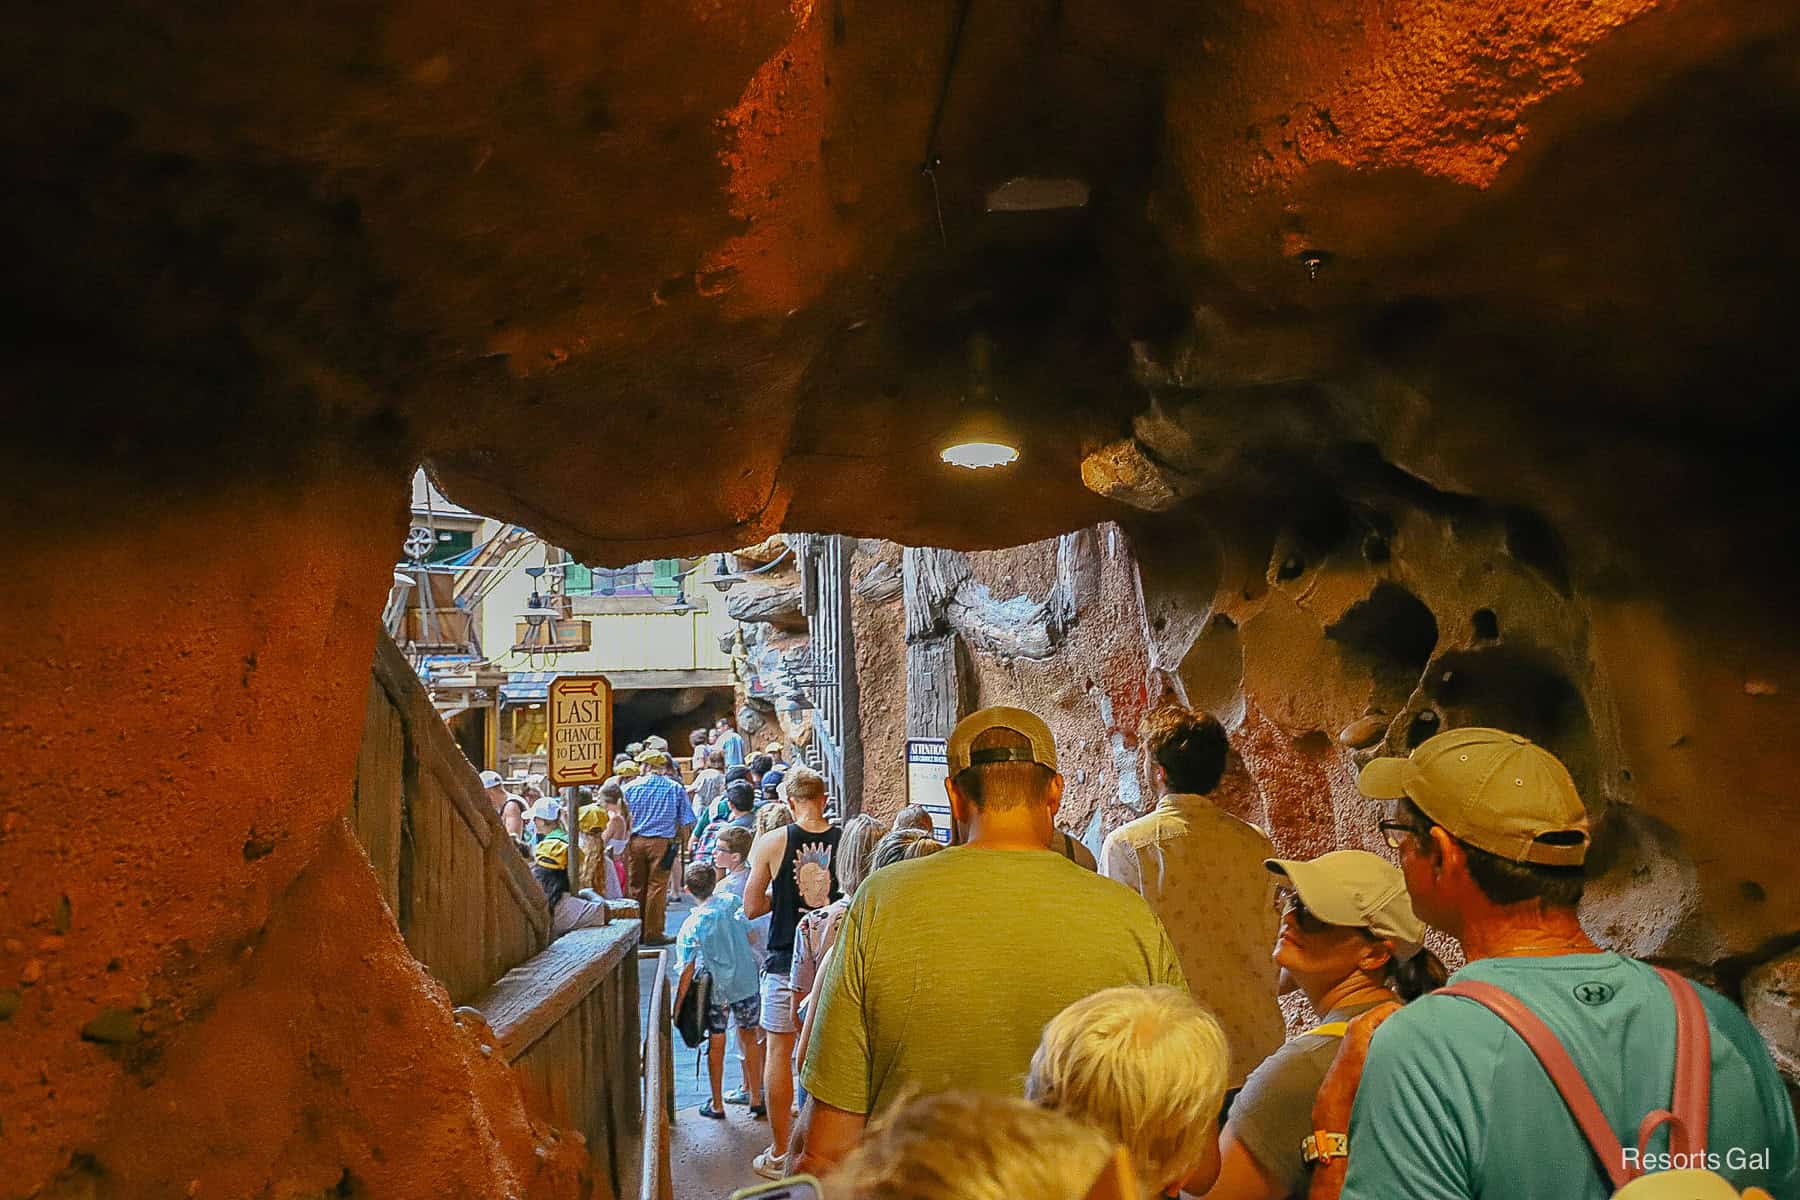 guests waiting at the last chance area to board a log at Tiana's Bayou Adventure 